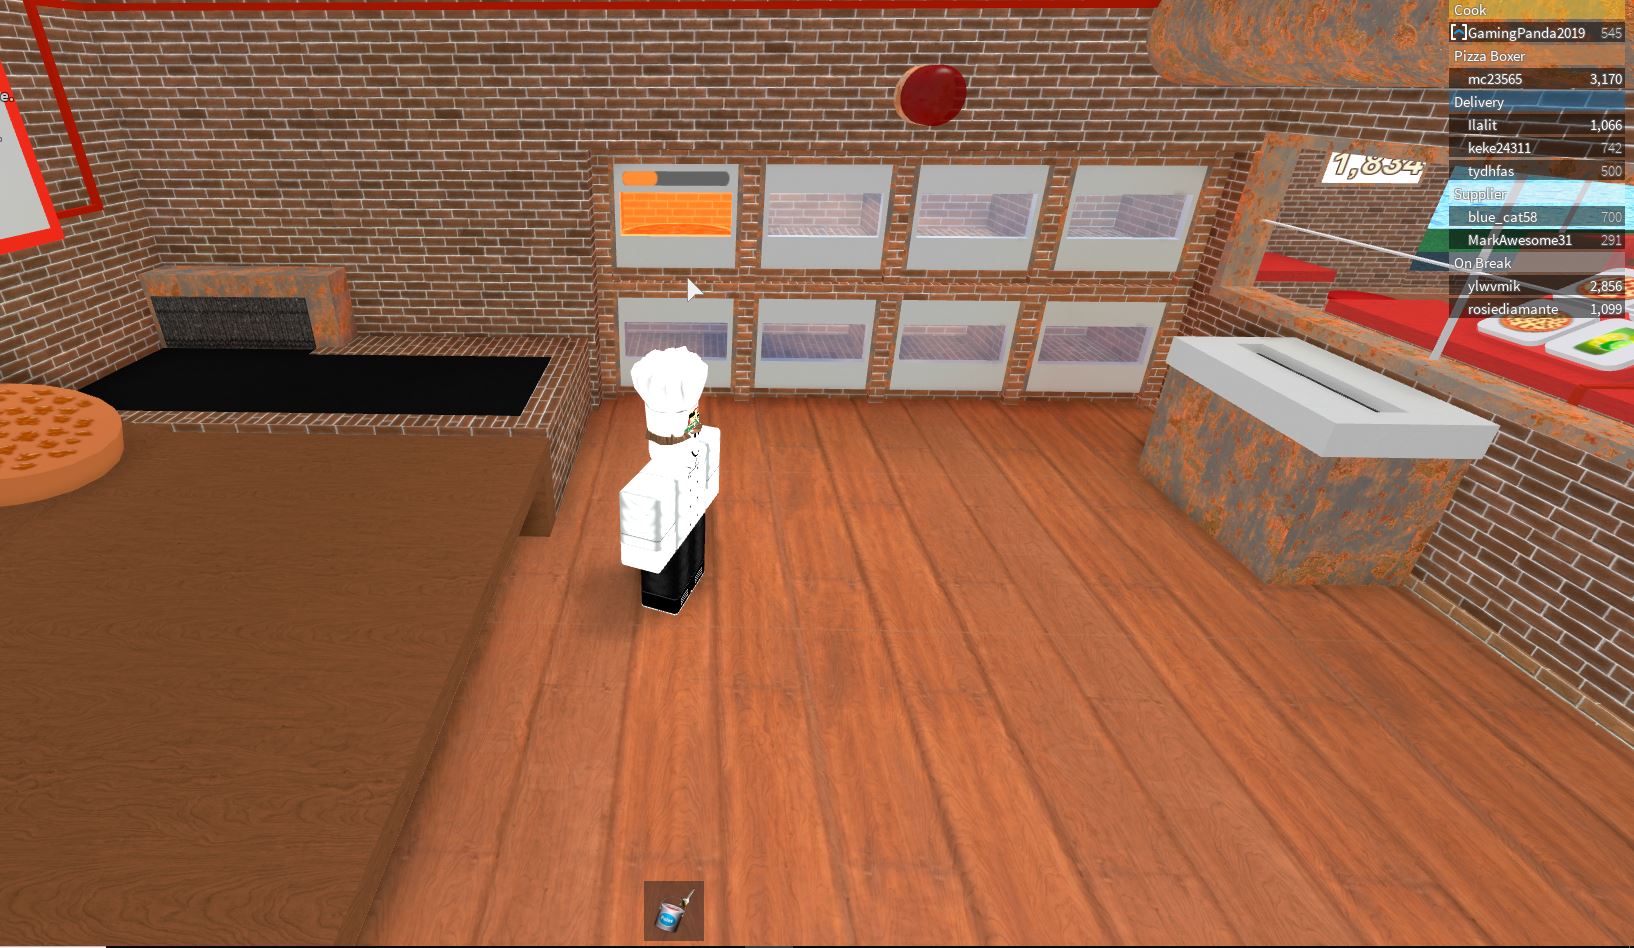 Roblox Work At A Pizza Place Secret Spots How To Get Free Roblox Robux Codes - dued1 at dued1roblox twitter